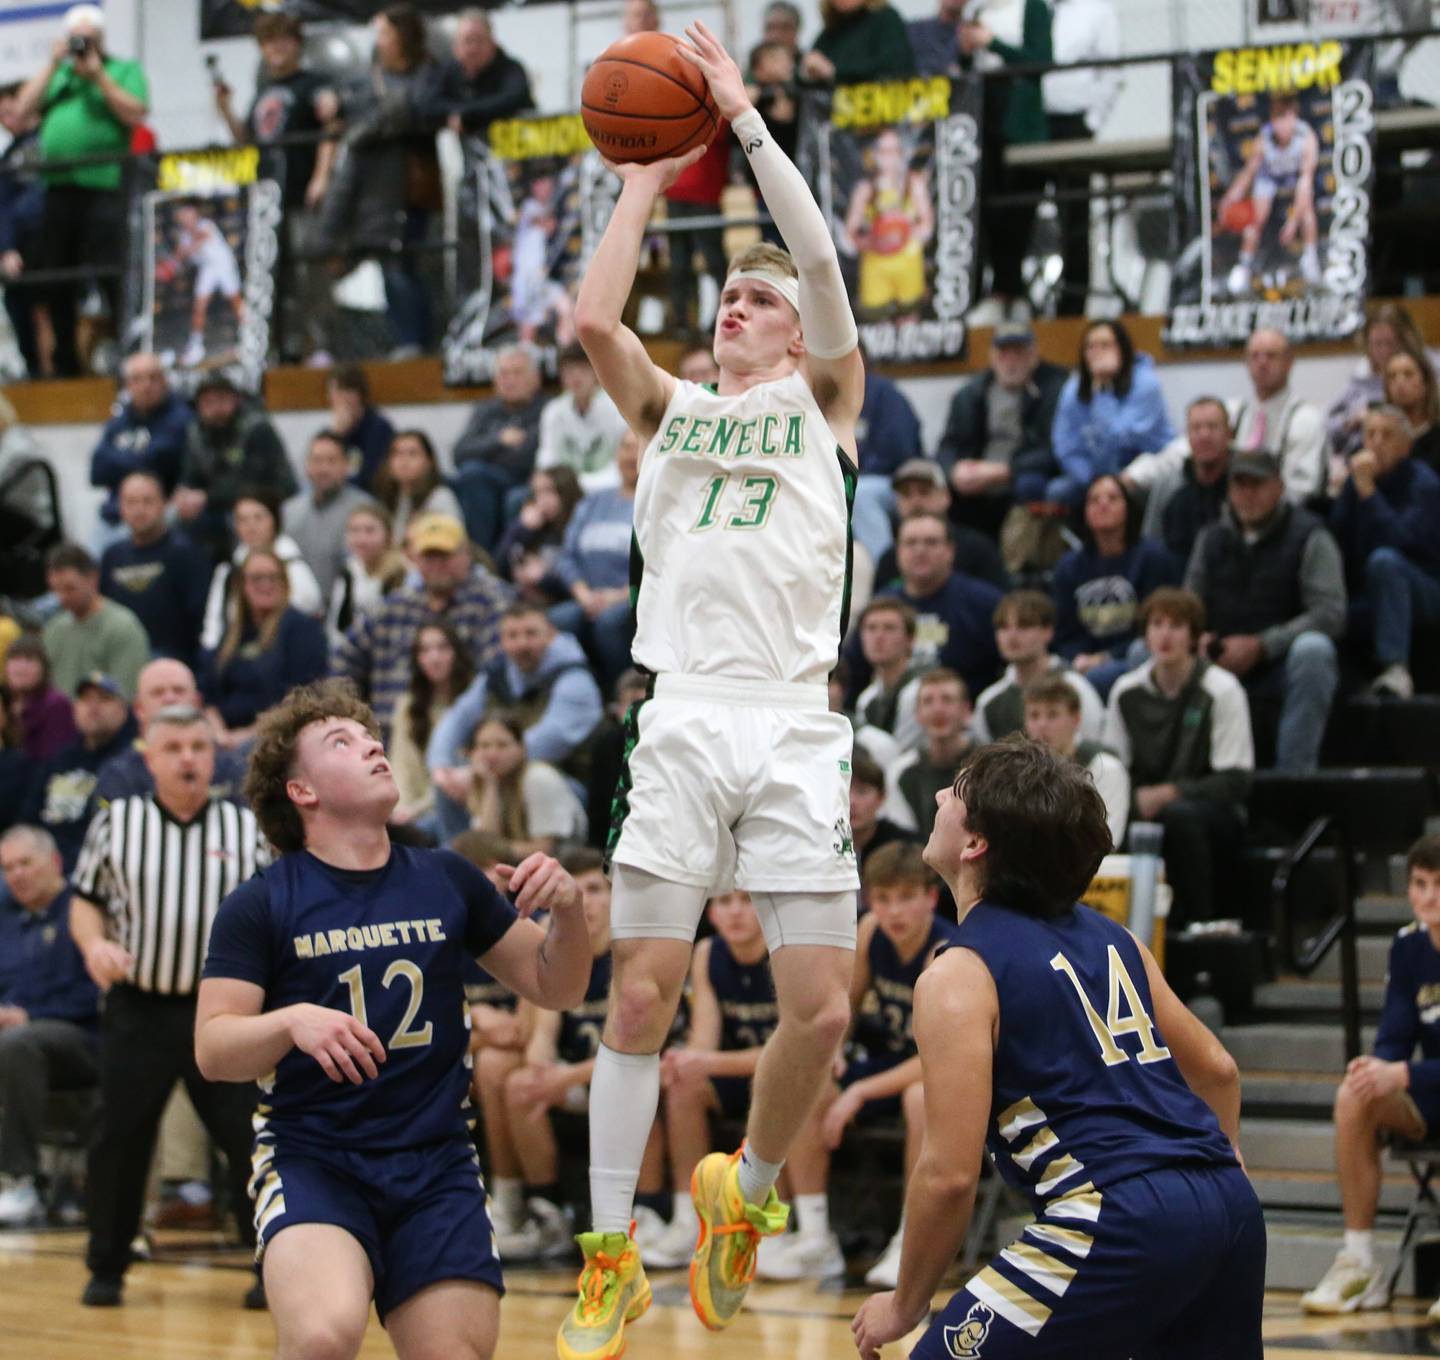 Seneca's Paxton Giertz rises for a jumper against Marquette during the 2023 Tri-County Conference Tournament at Putnam County High School.